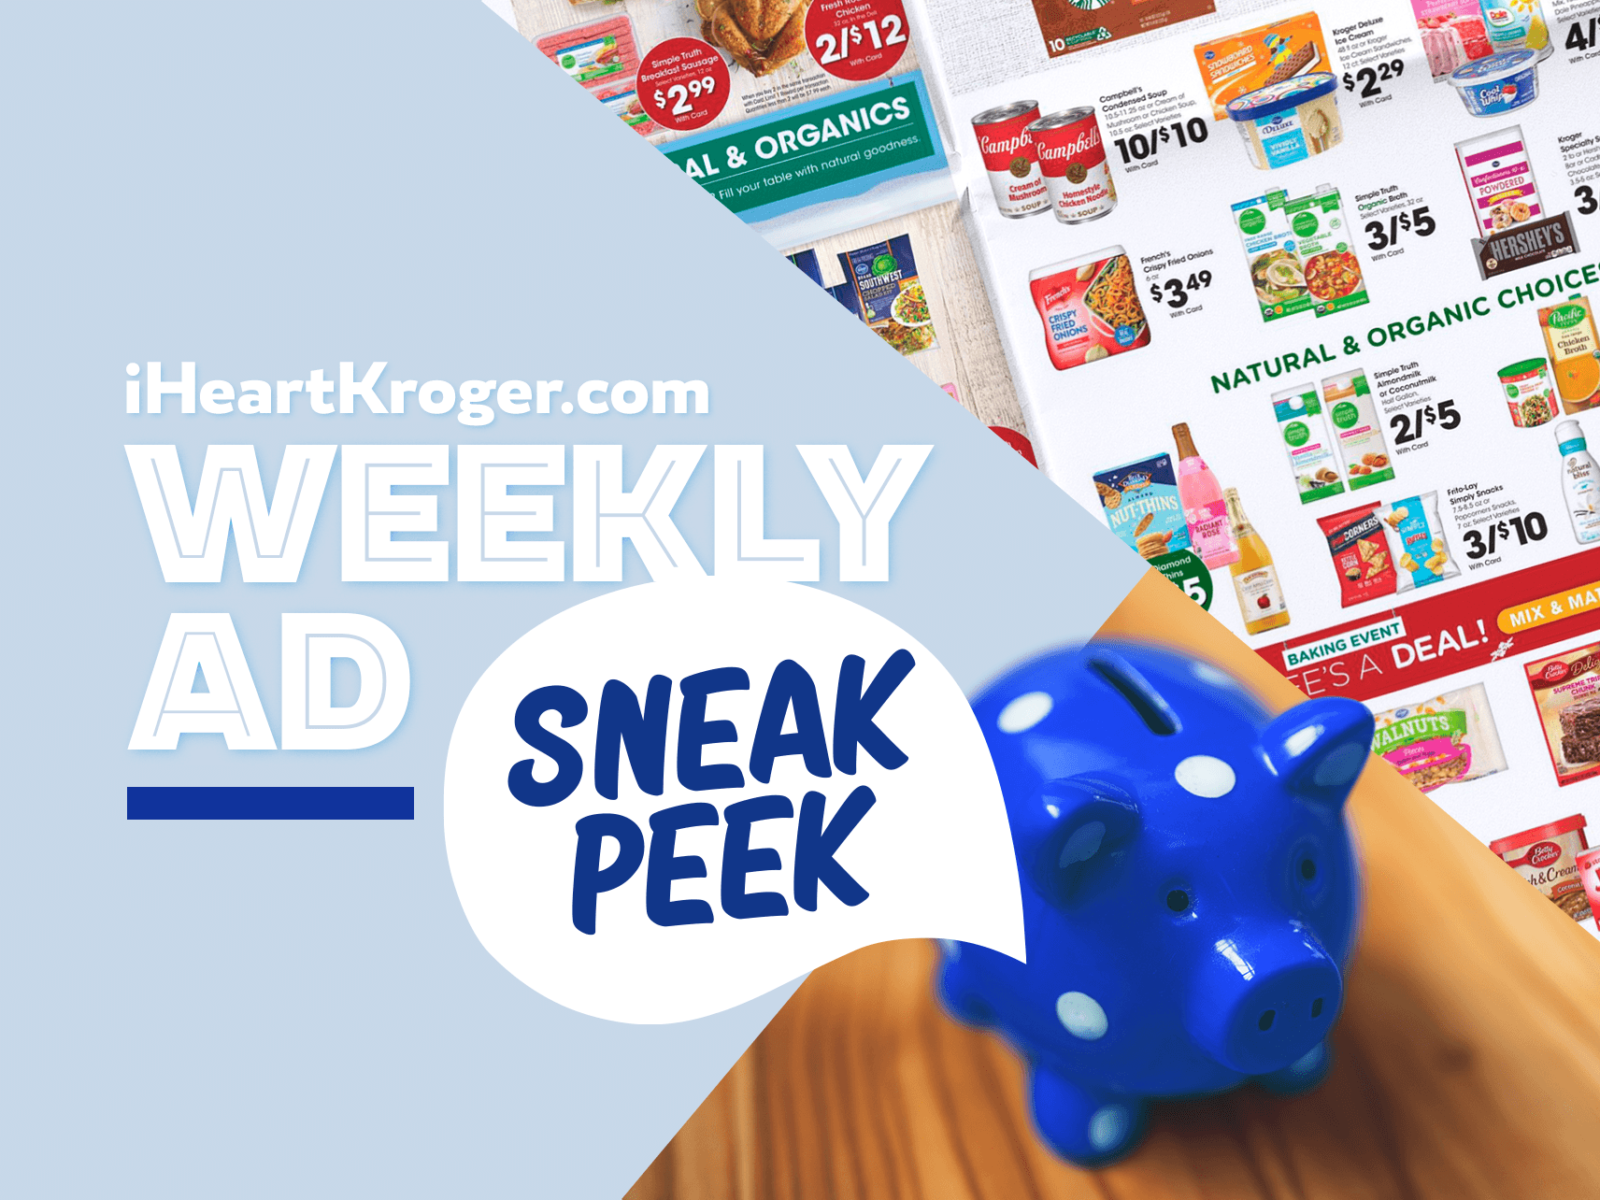 Kroger Ad & Coupons Week Of 8/31 to 9/6 – Mega Sale Continues